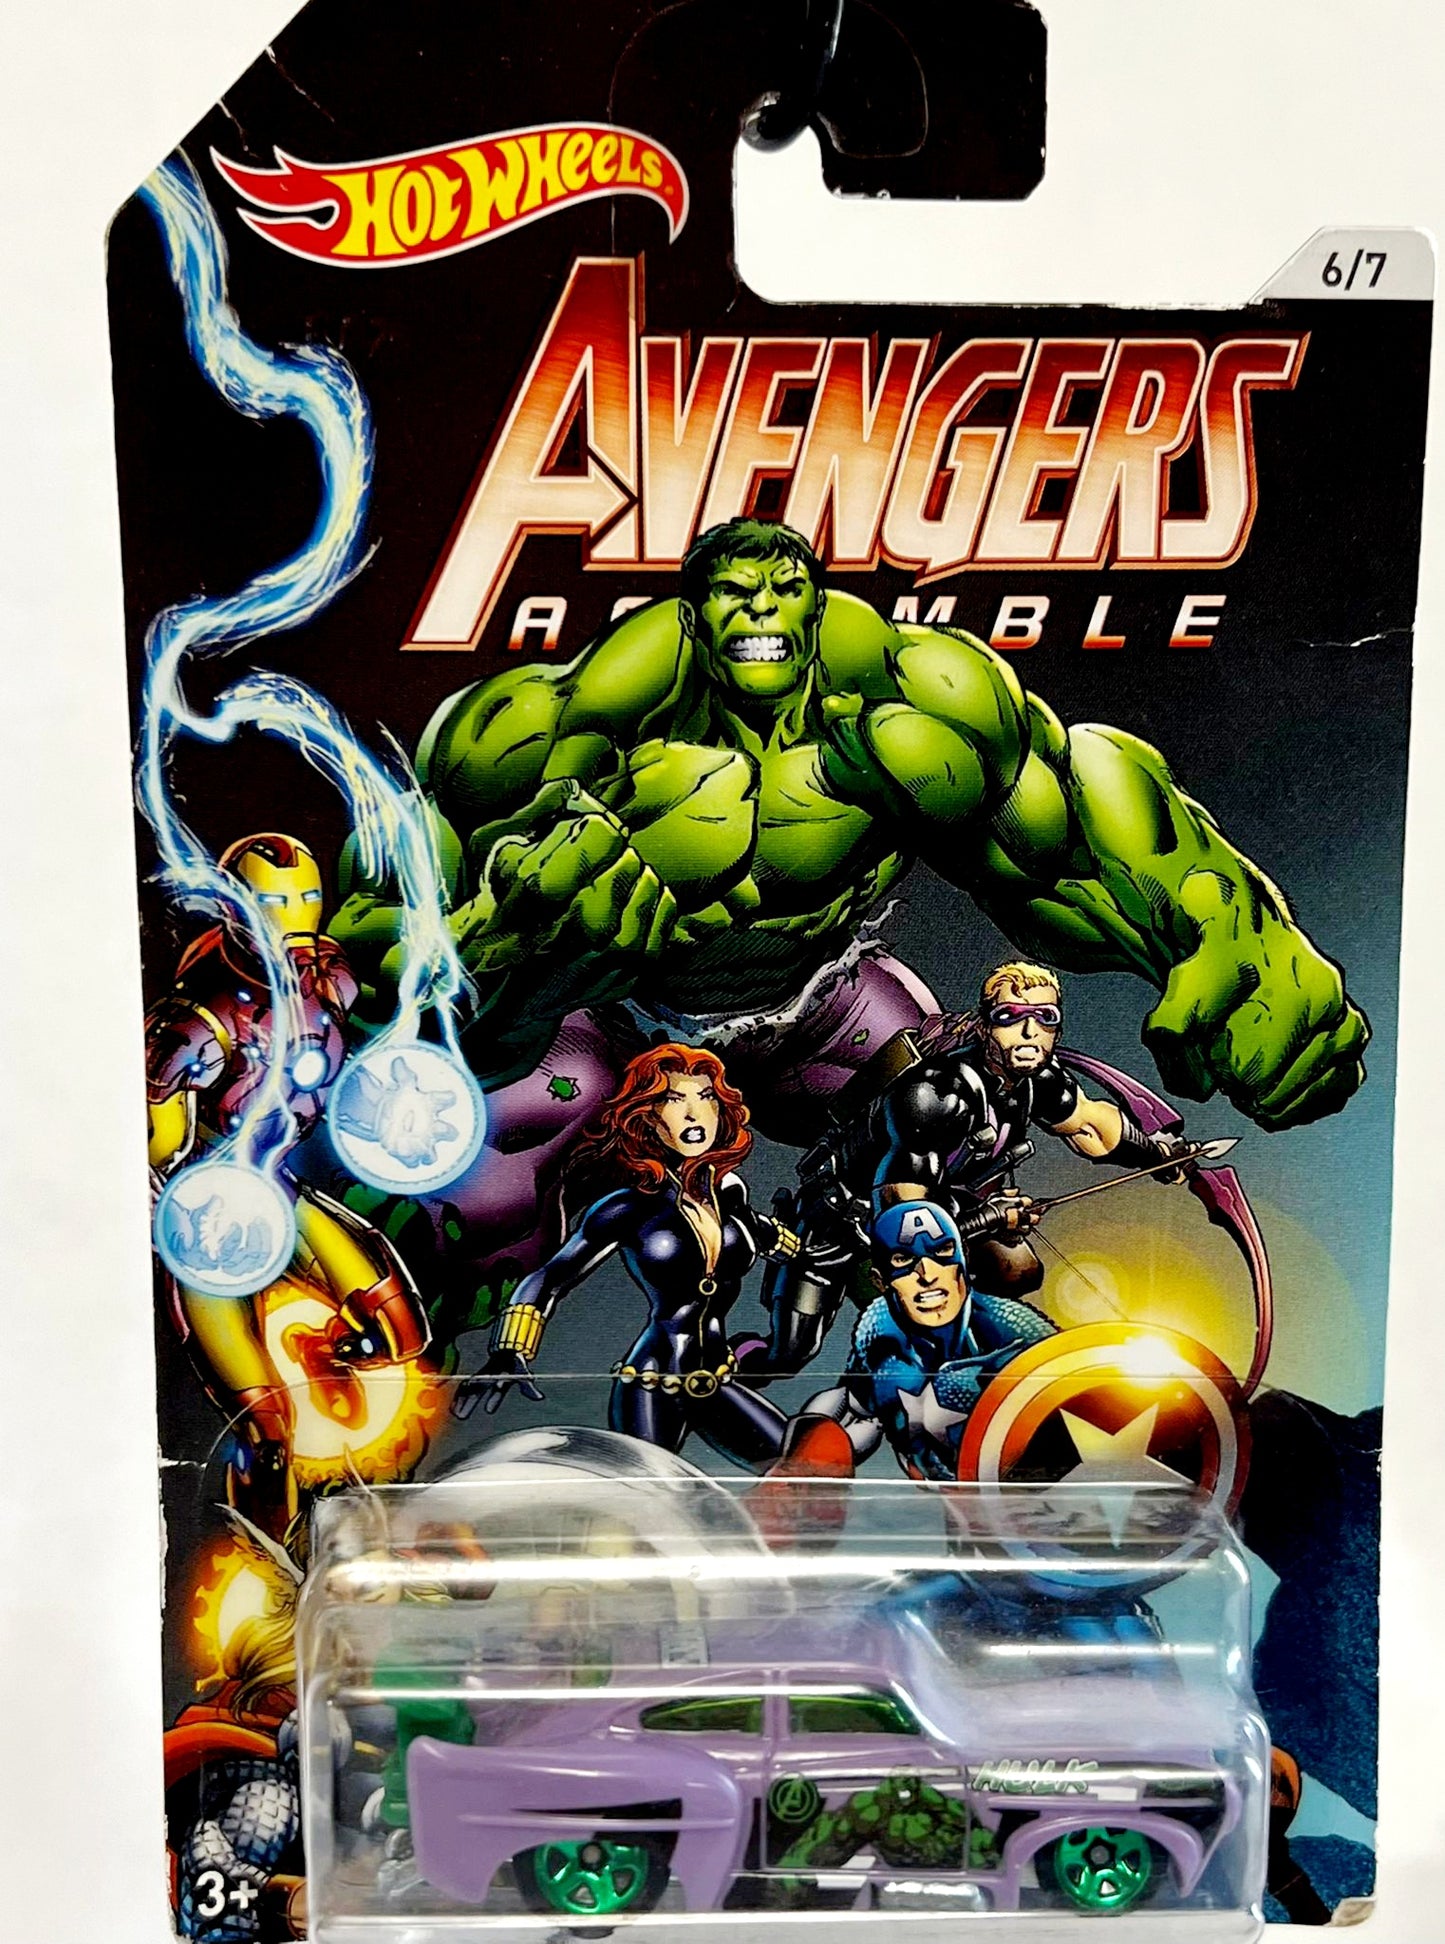 New *3 Hot Wheels/The Avengers Die-Cast Cars 1/7